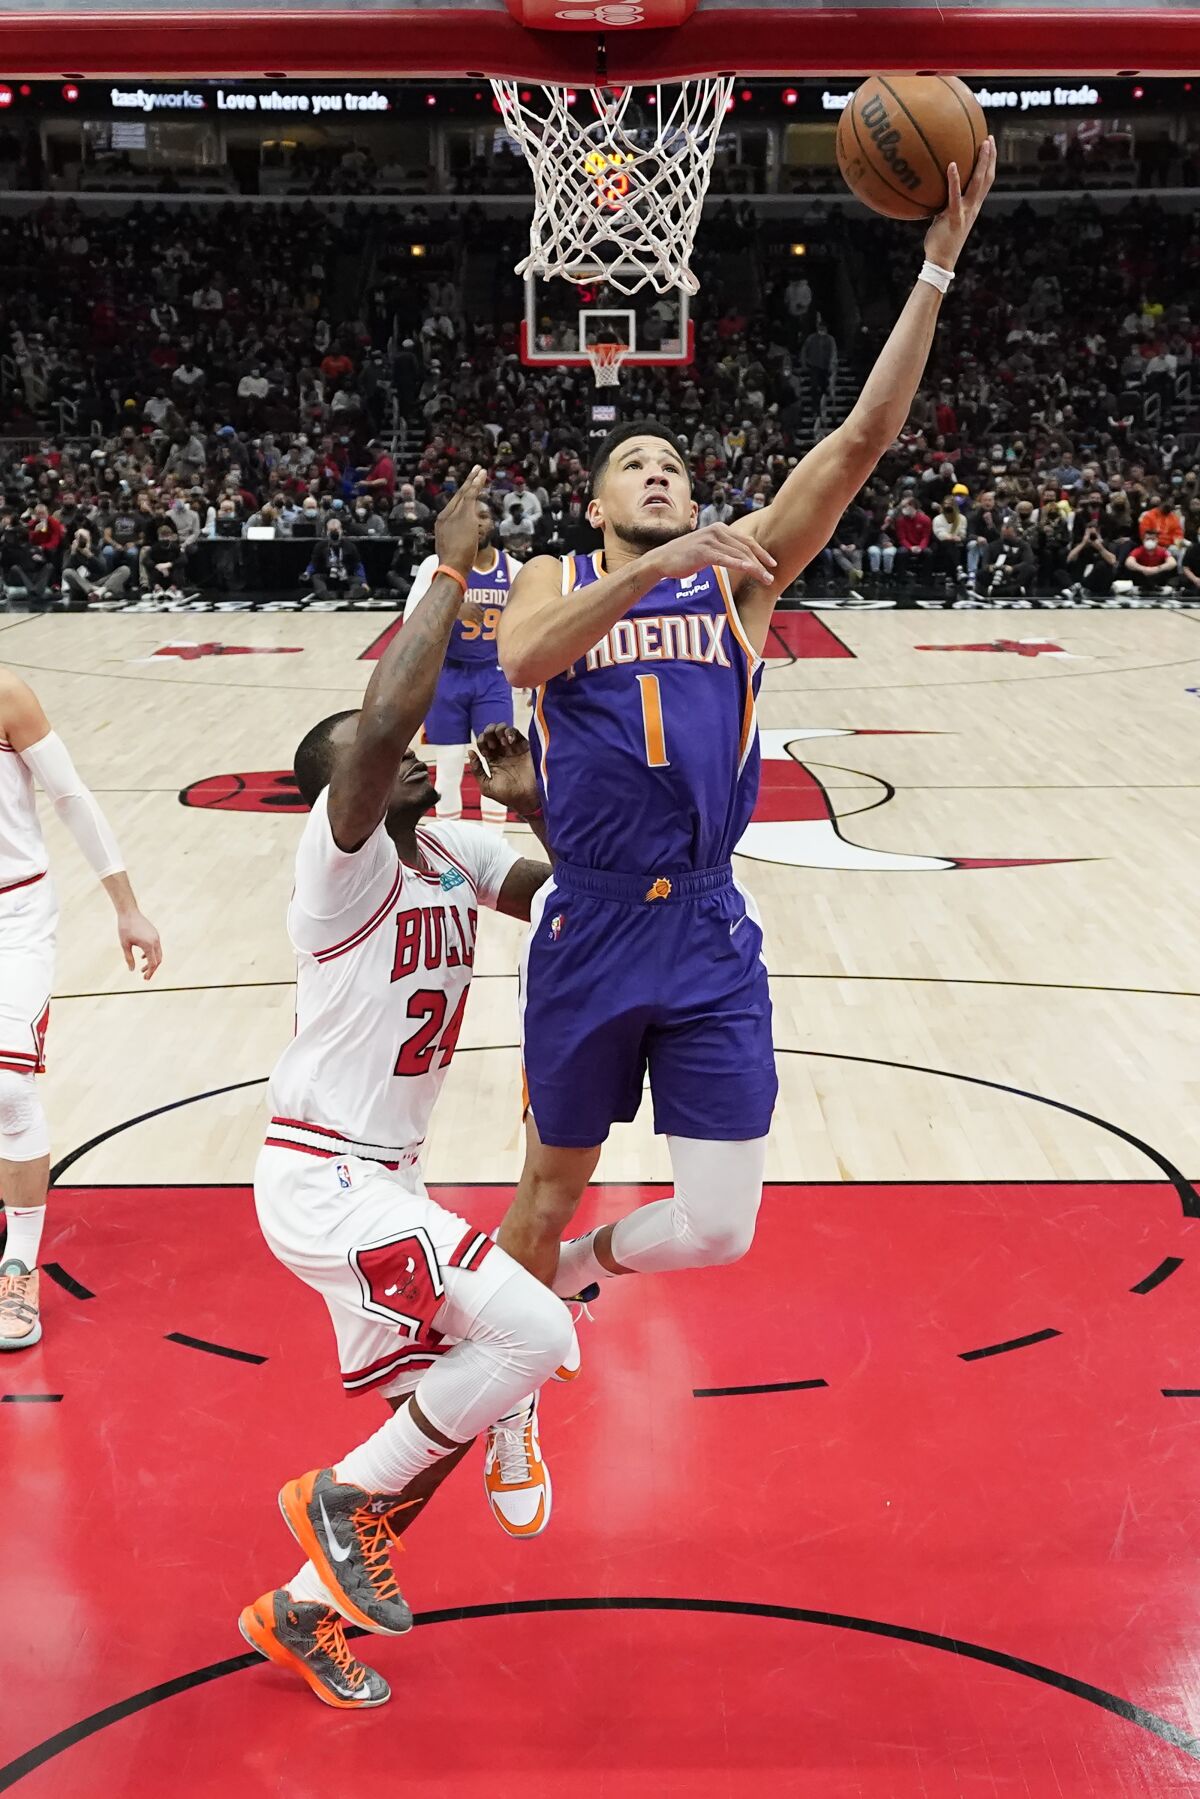 Phoenix Suns' Devin Booker (1) scores past Chicago Bulls' Javonte Green during the first half of an NBA basketball game Monday, Feb. 7, 2022, in Chicago. (AP Photo/Charles Rex Arbogast)